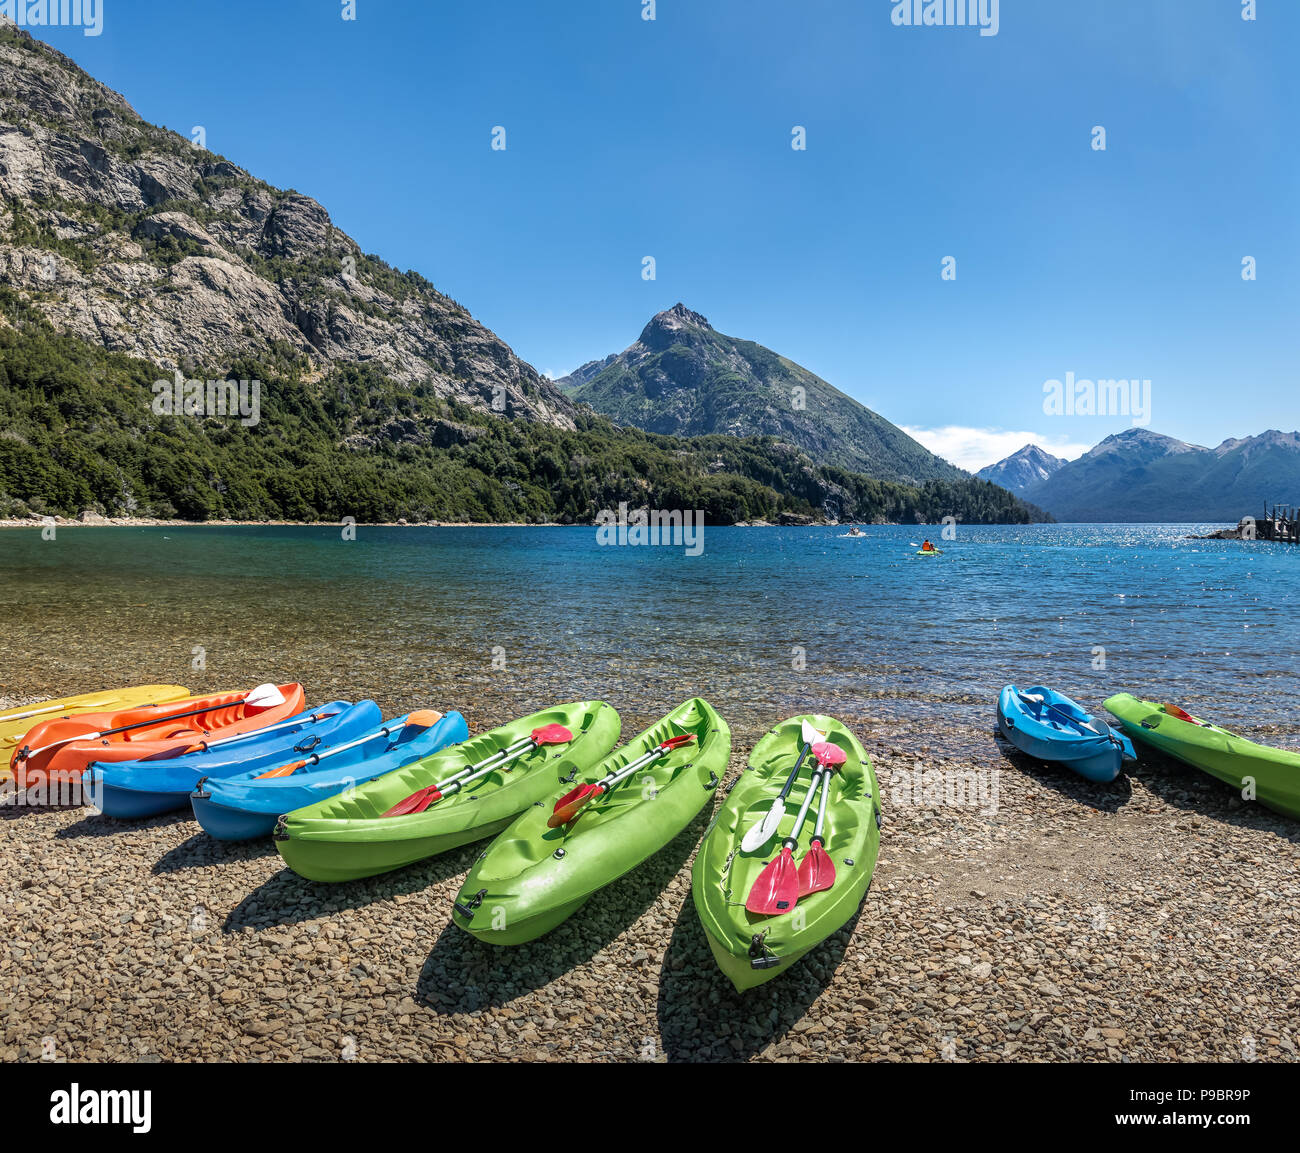 Colorful Kayaks in a lake surrounded by mountains at Bahia Lopez in Circuito Chico  - Bariloche, Patagonia, Argentina Stock Photo